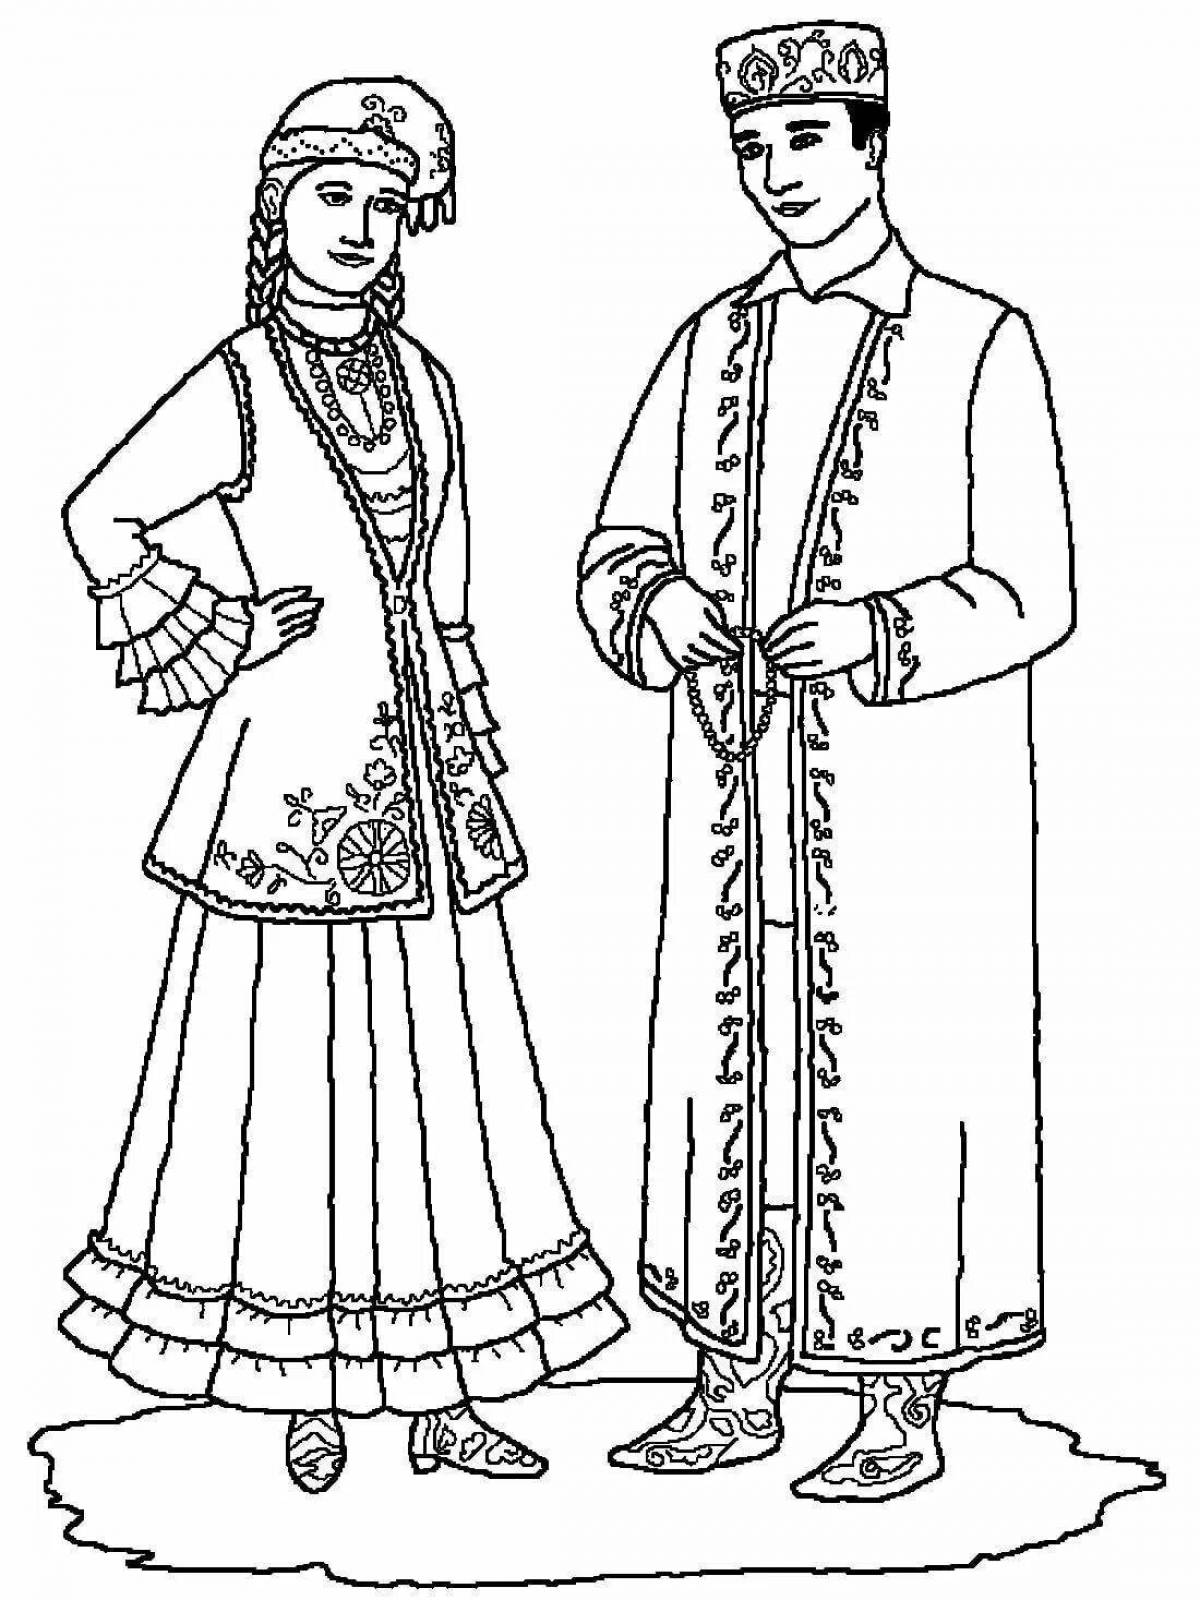 Detailed Russian costume coloring page